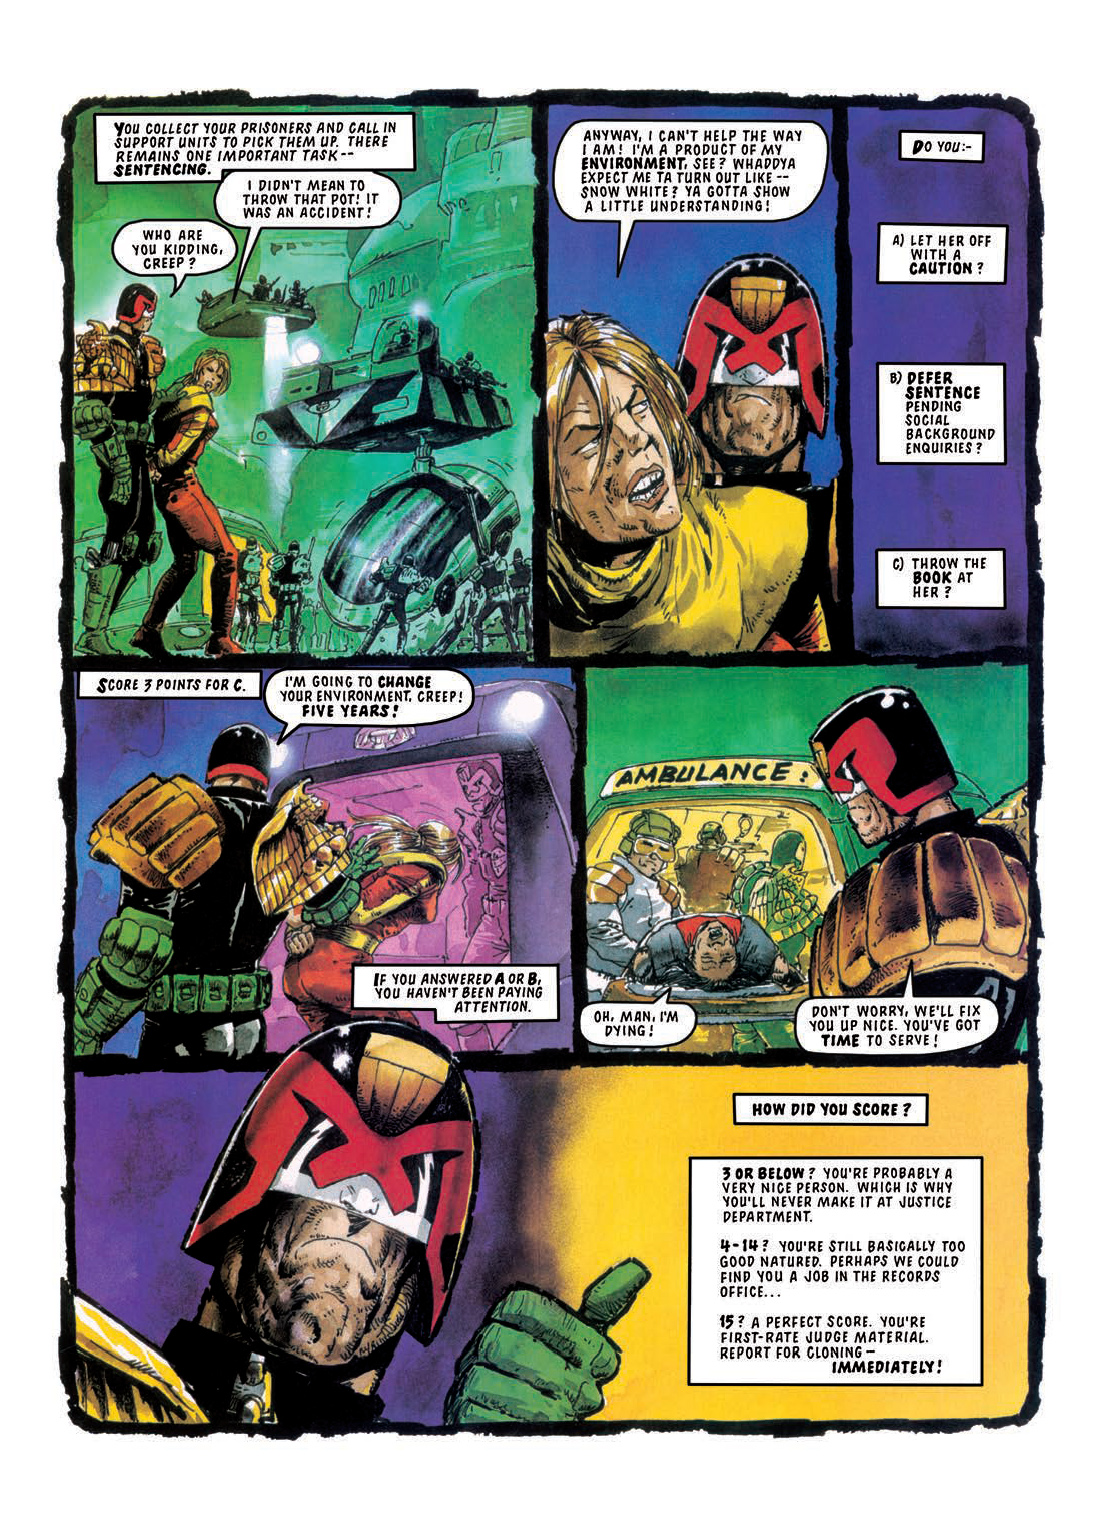 Read online Judge Dredd: The Restricted Files comic -  Issue # TPB 4 - 11